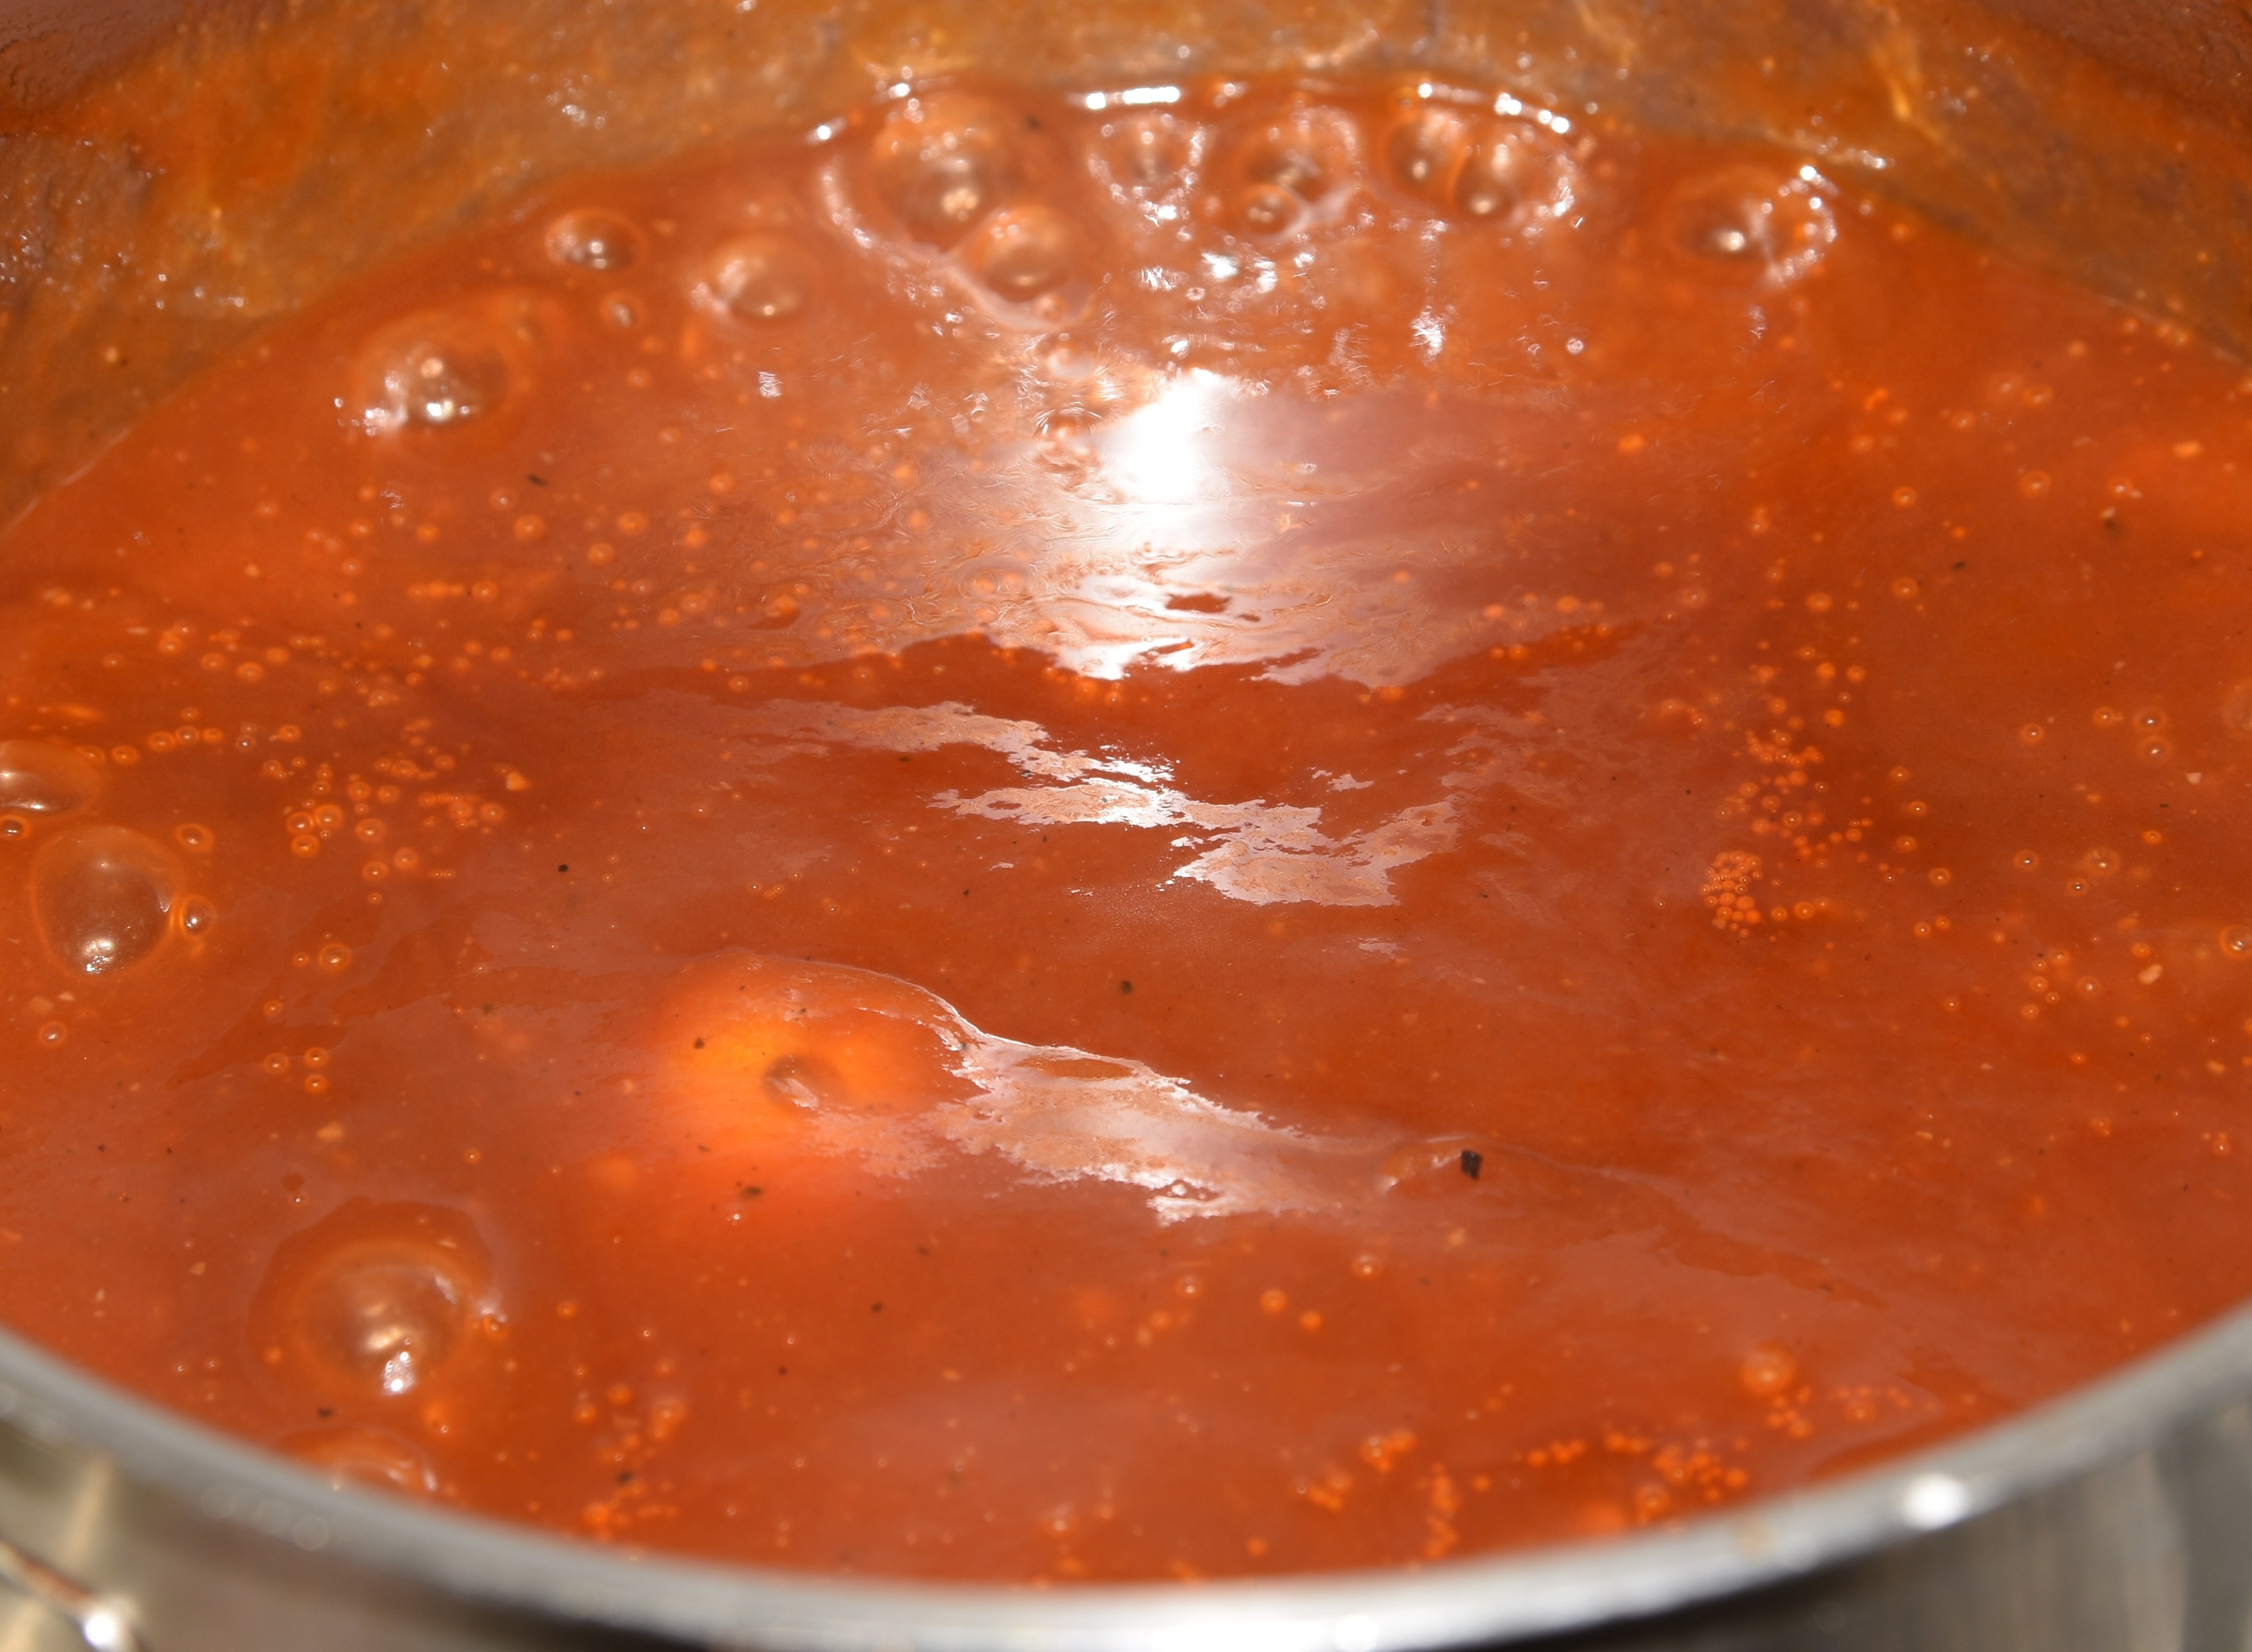 A close-up of a simmering intense red sauce, where a tomato is shyly floating.